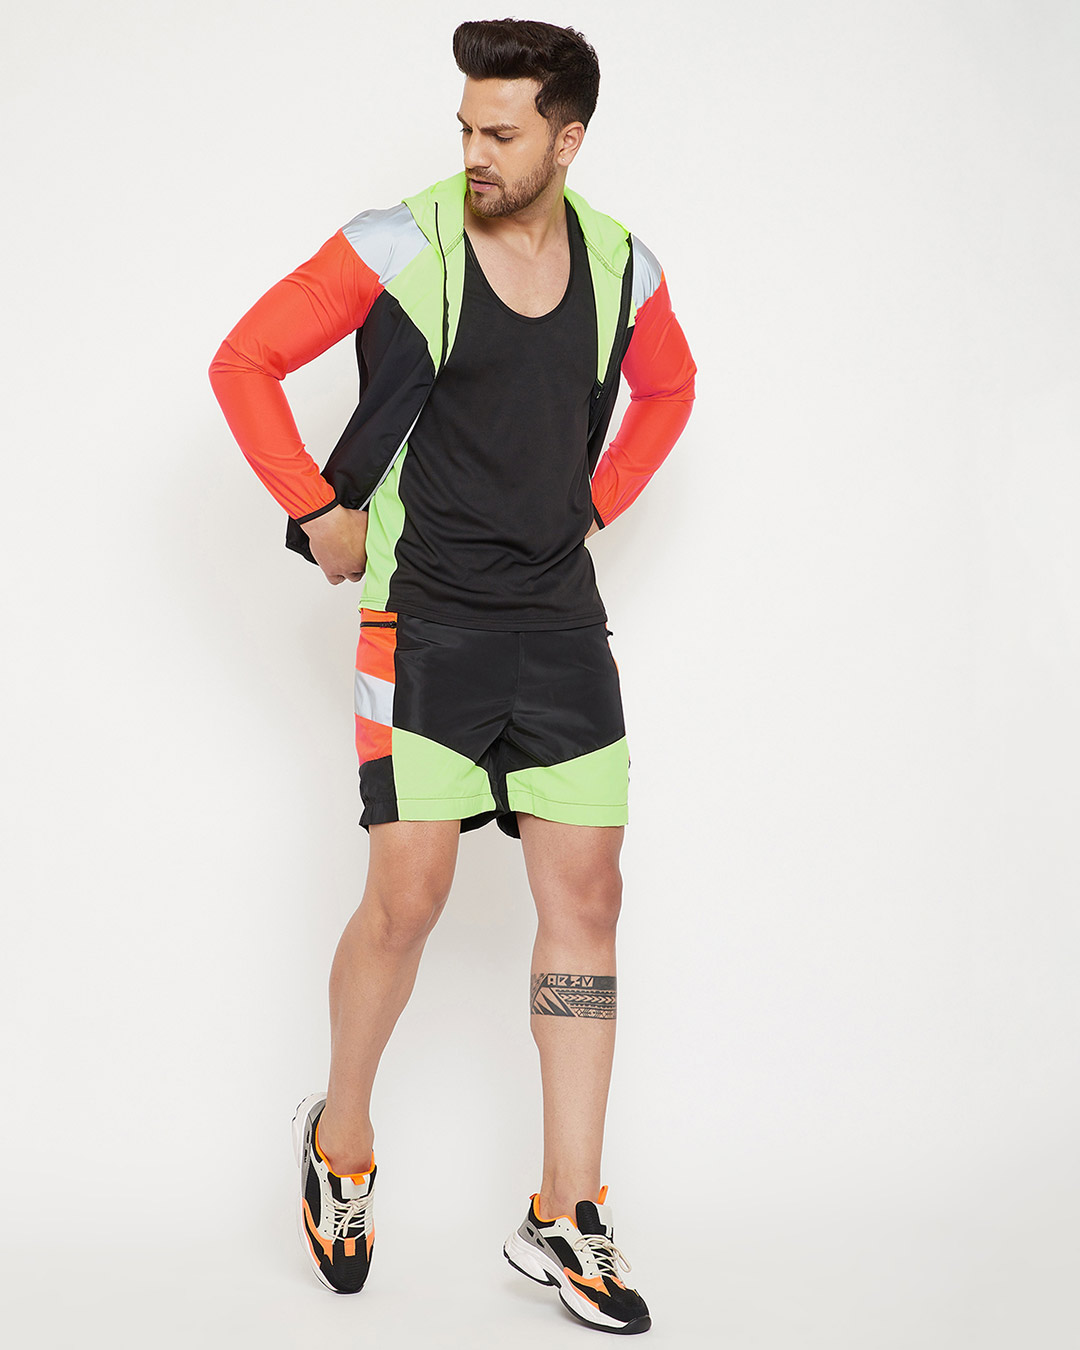 Shop Neon Active Cut & Sew Wind Cheater Jacket And Shorts Clothing Set-Back